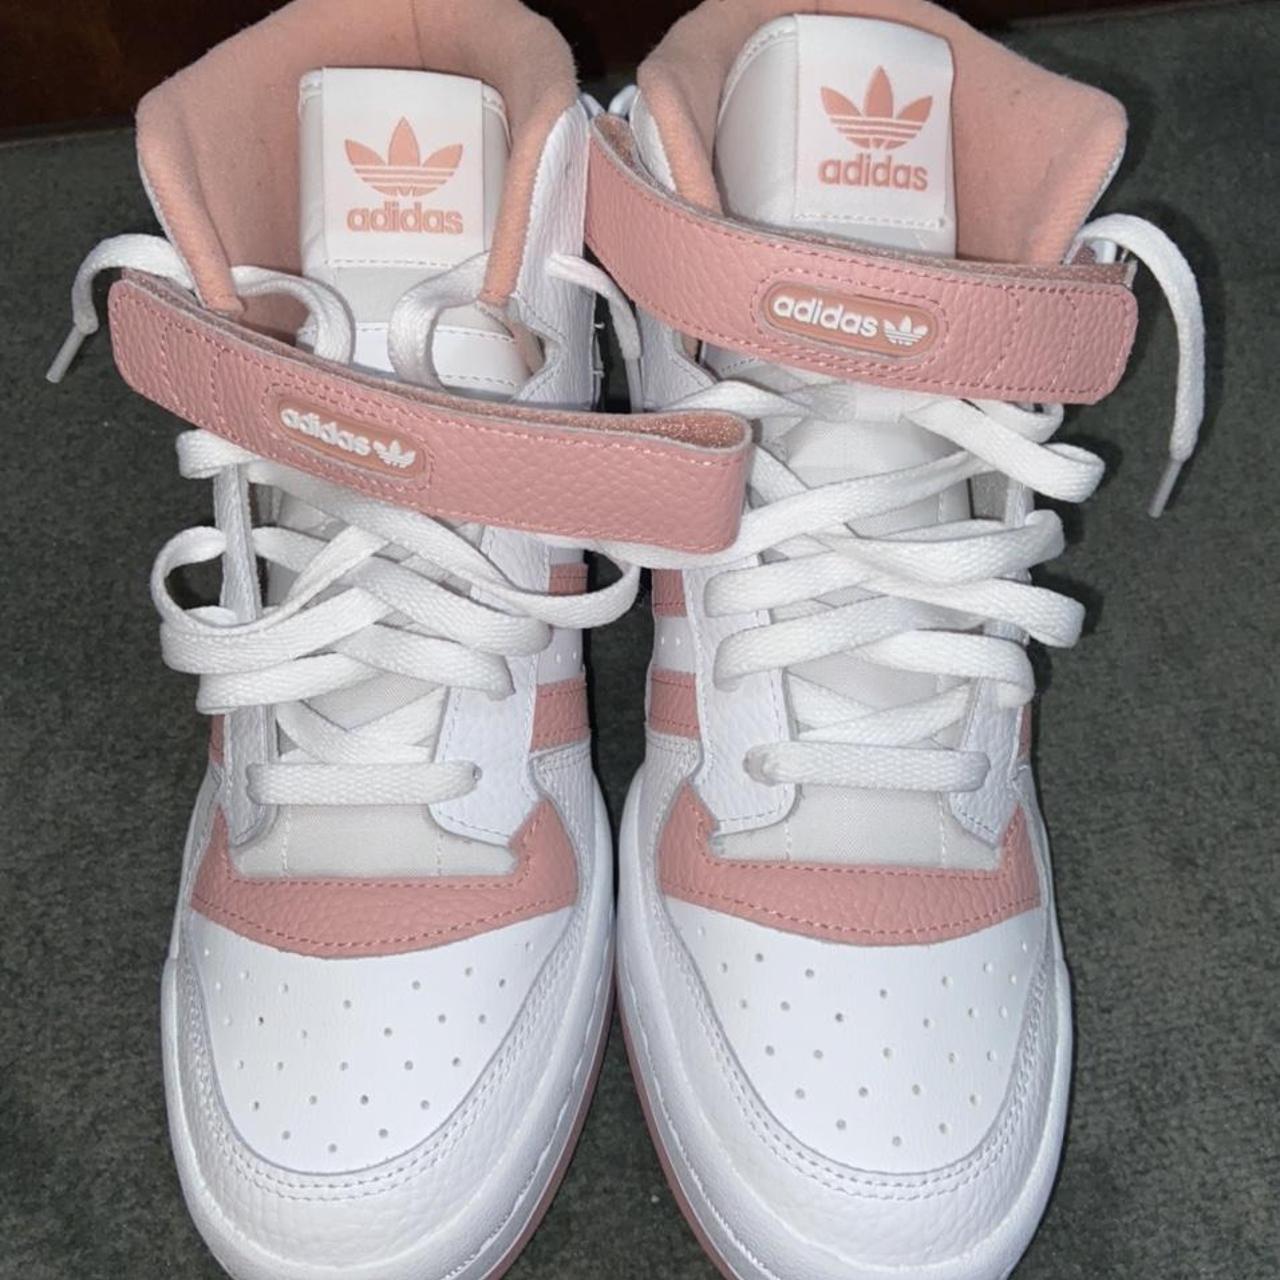 Product Image 3 - Adidas Forum Mid - Pink/White

Men’s